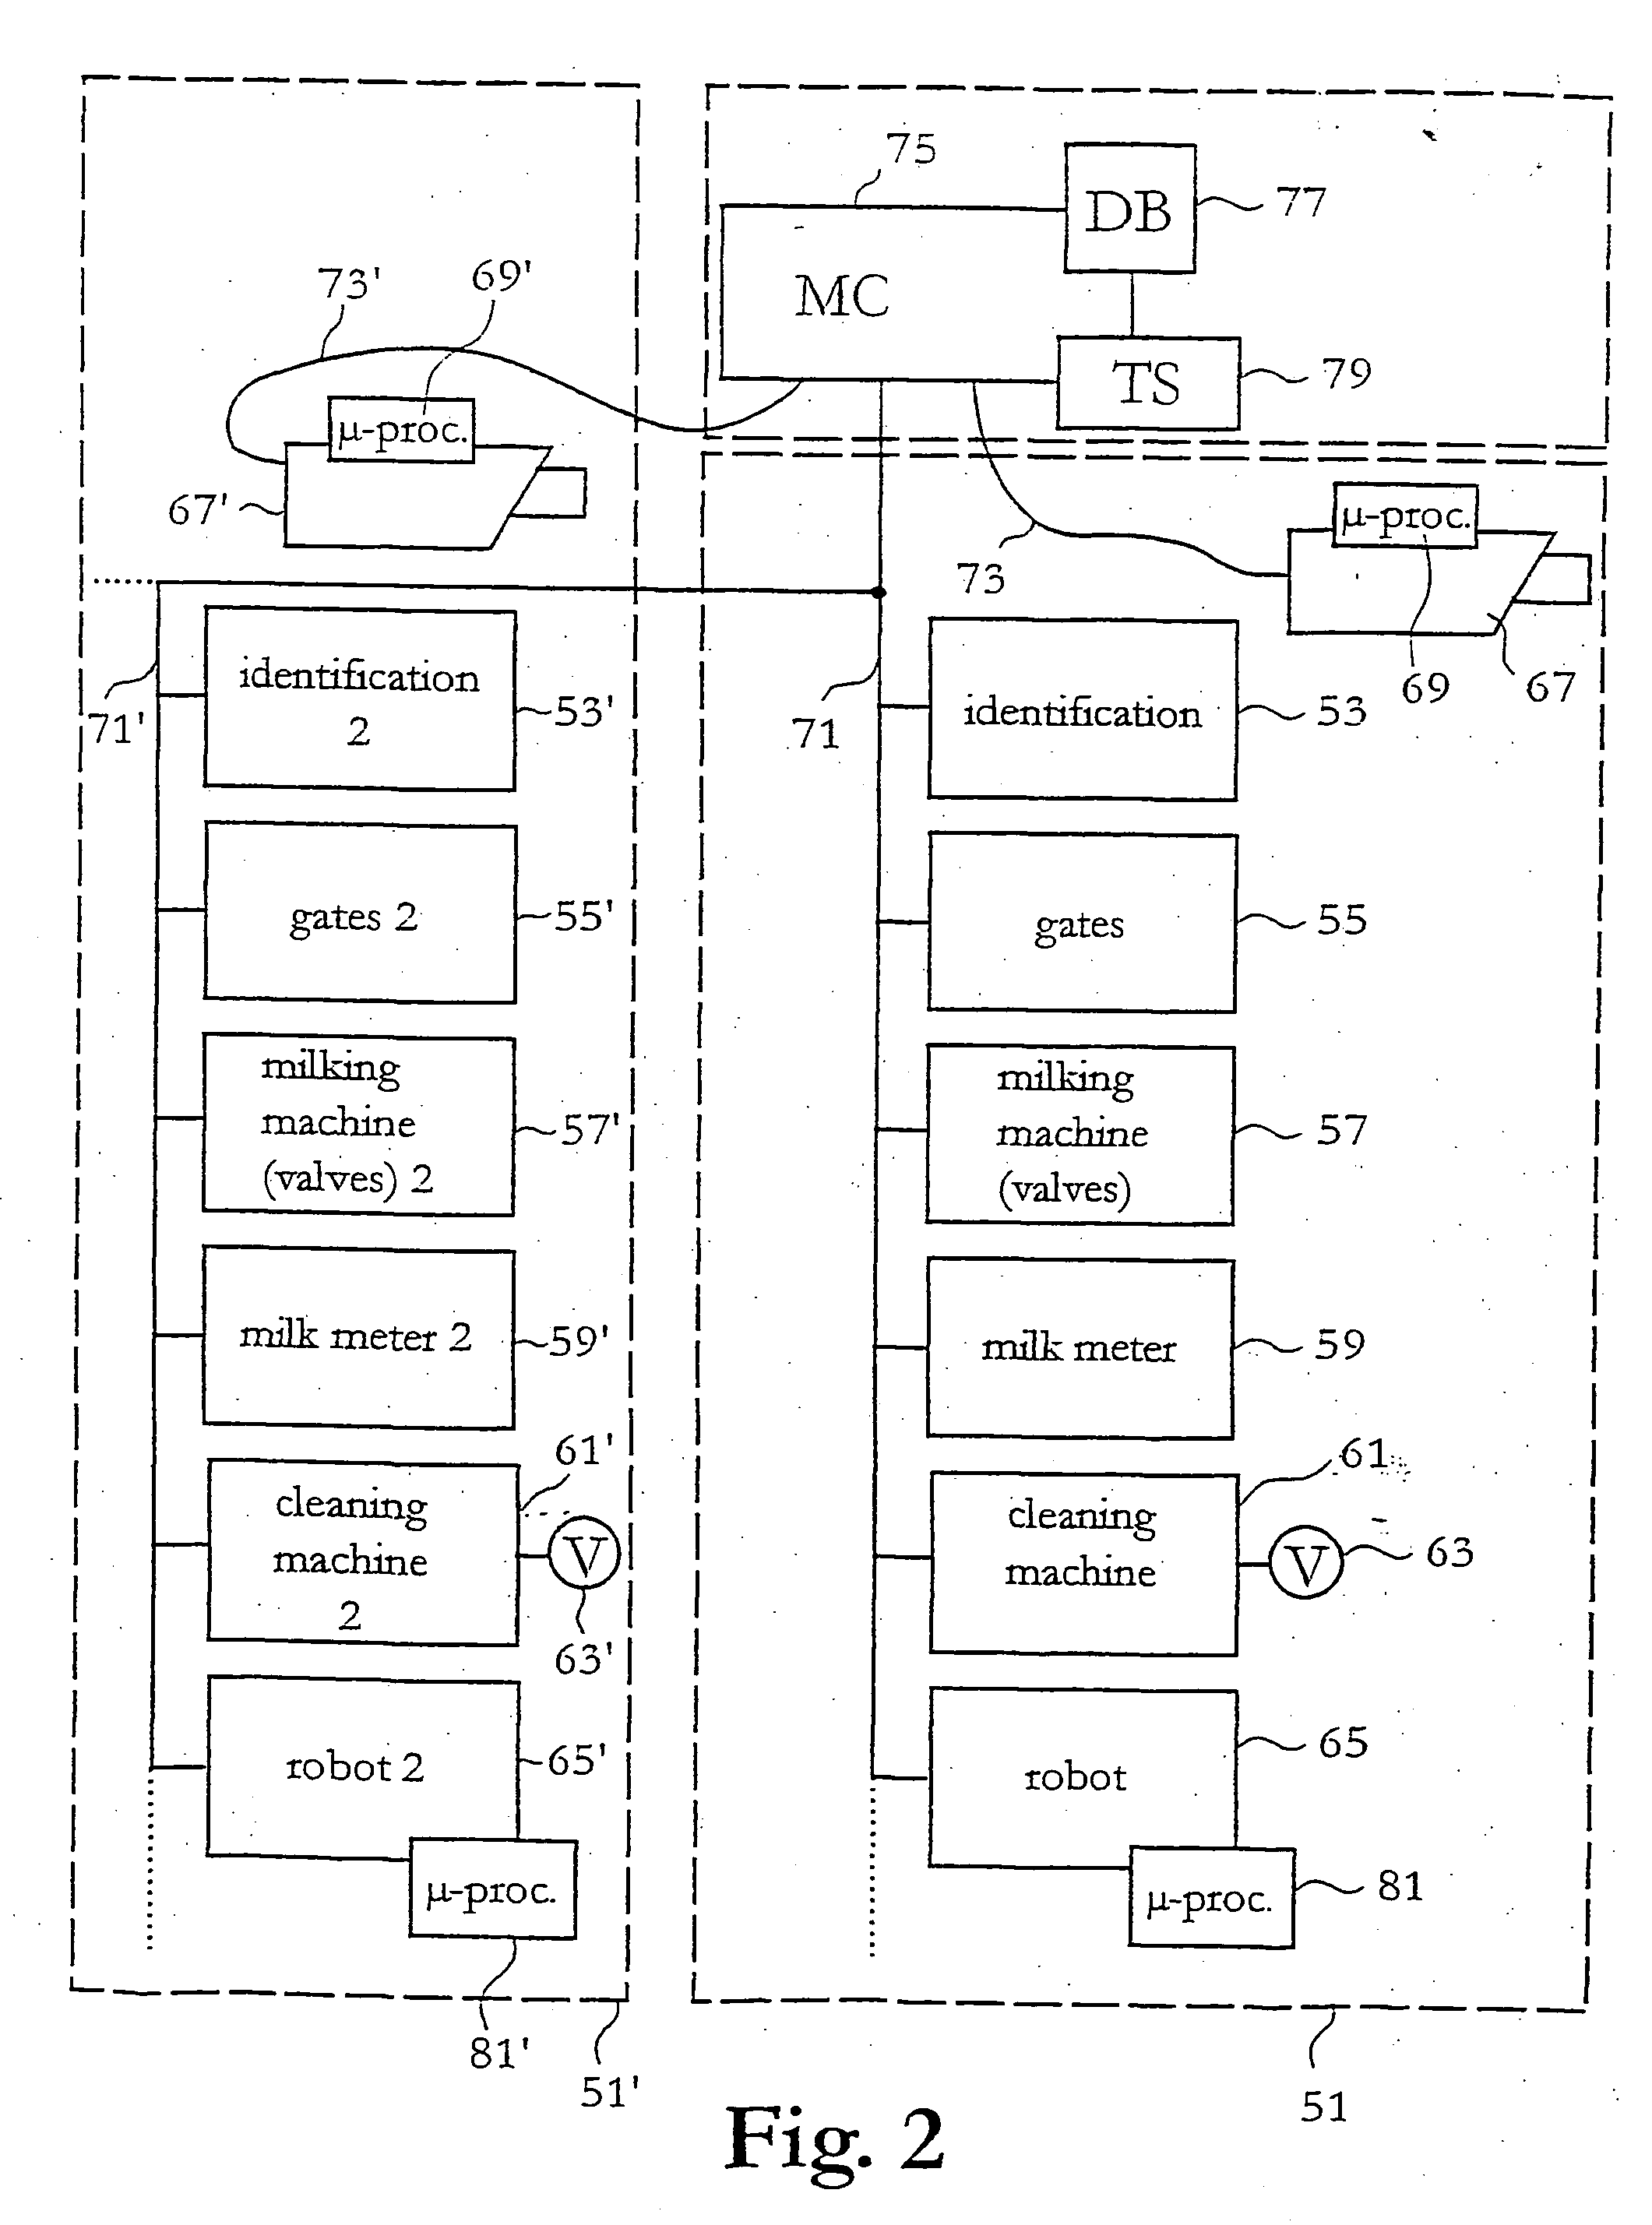 System and method for milking animals